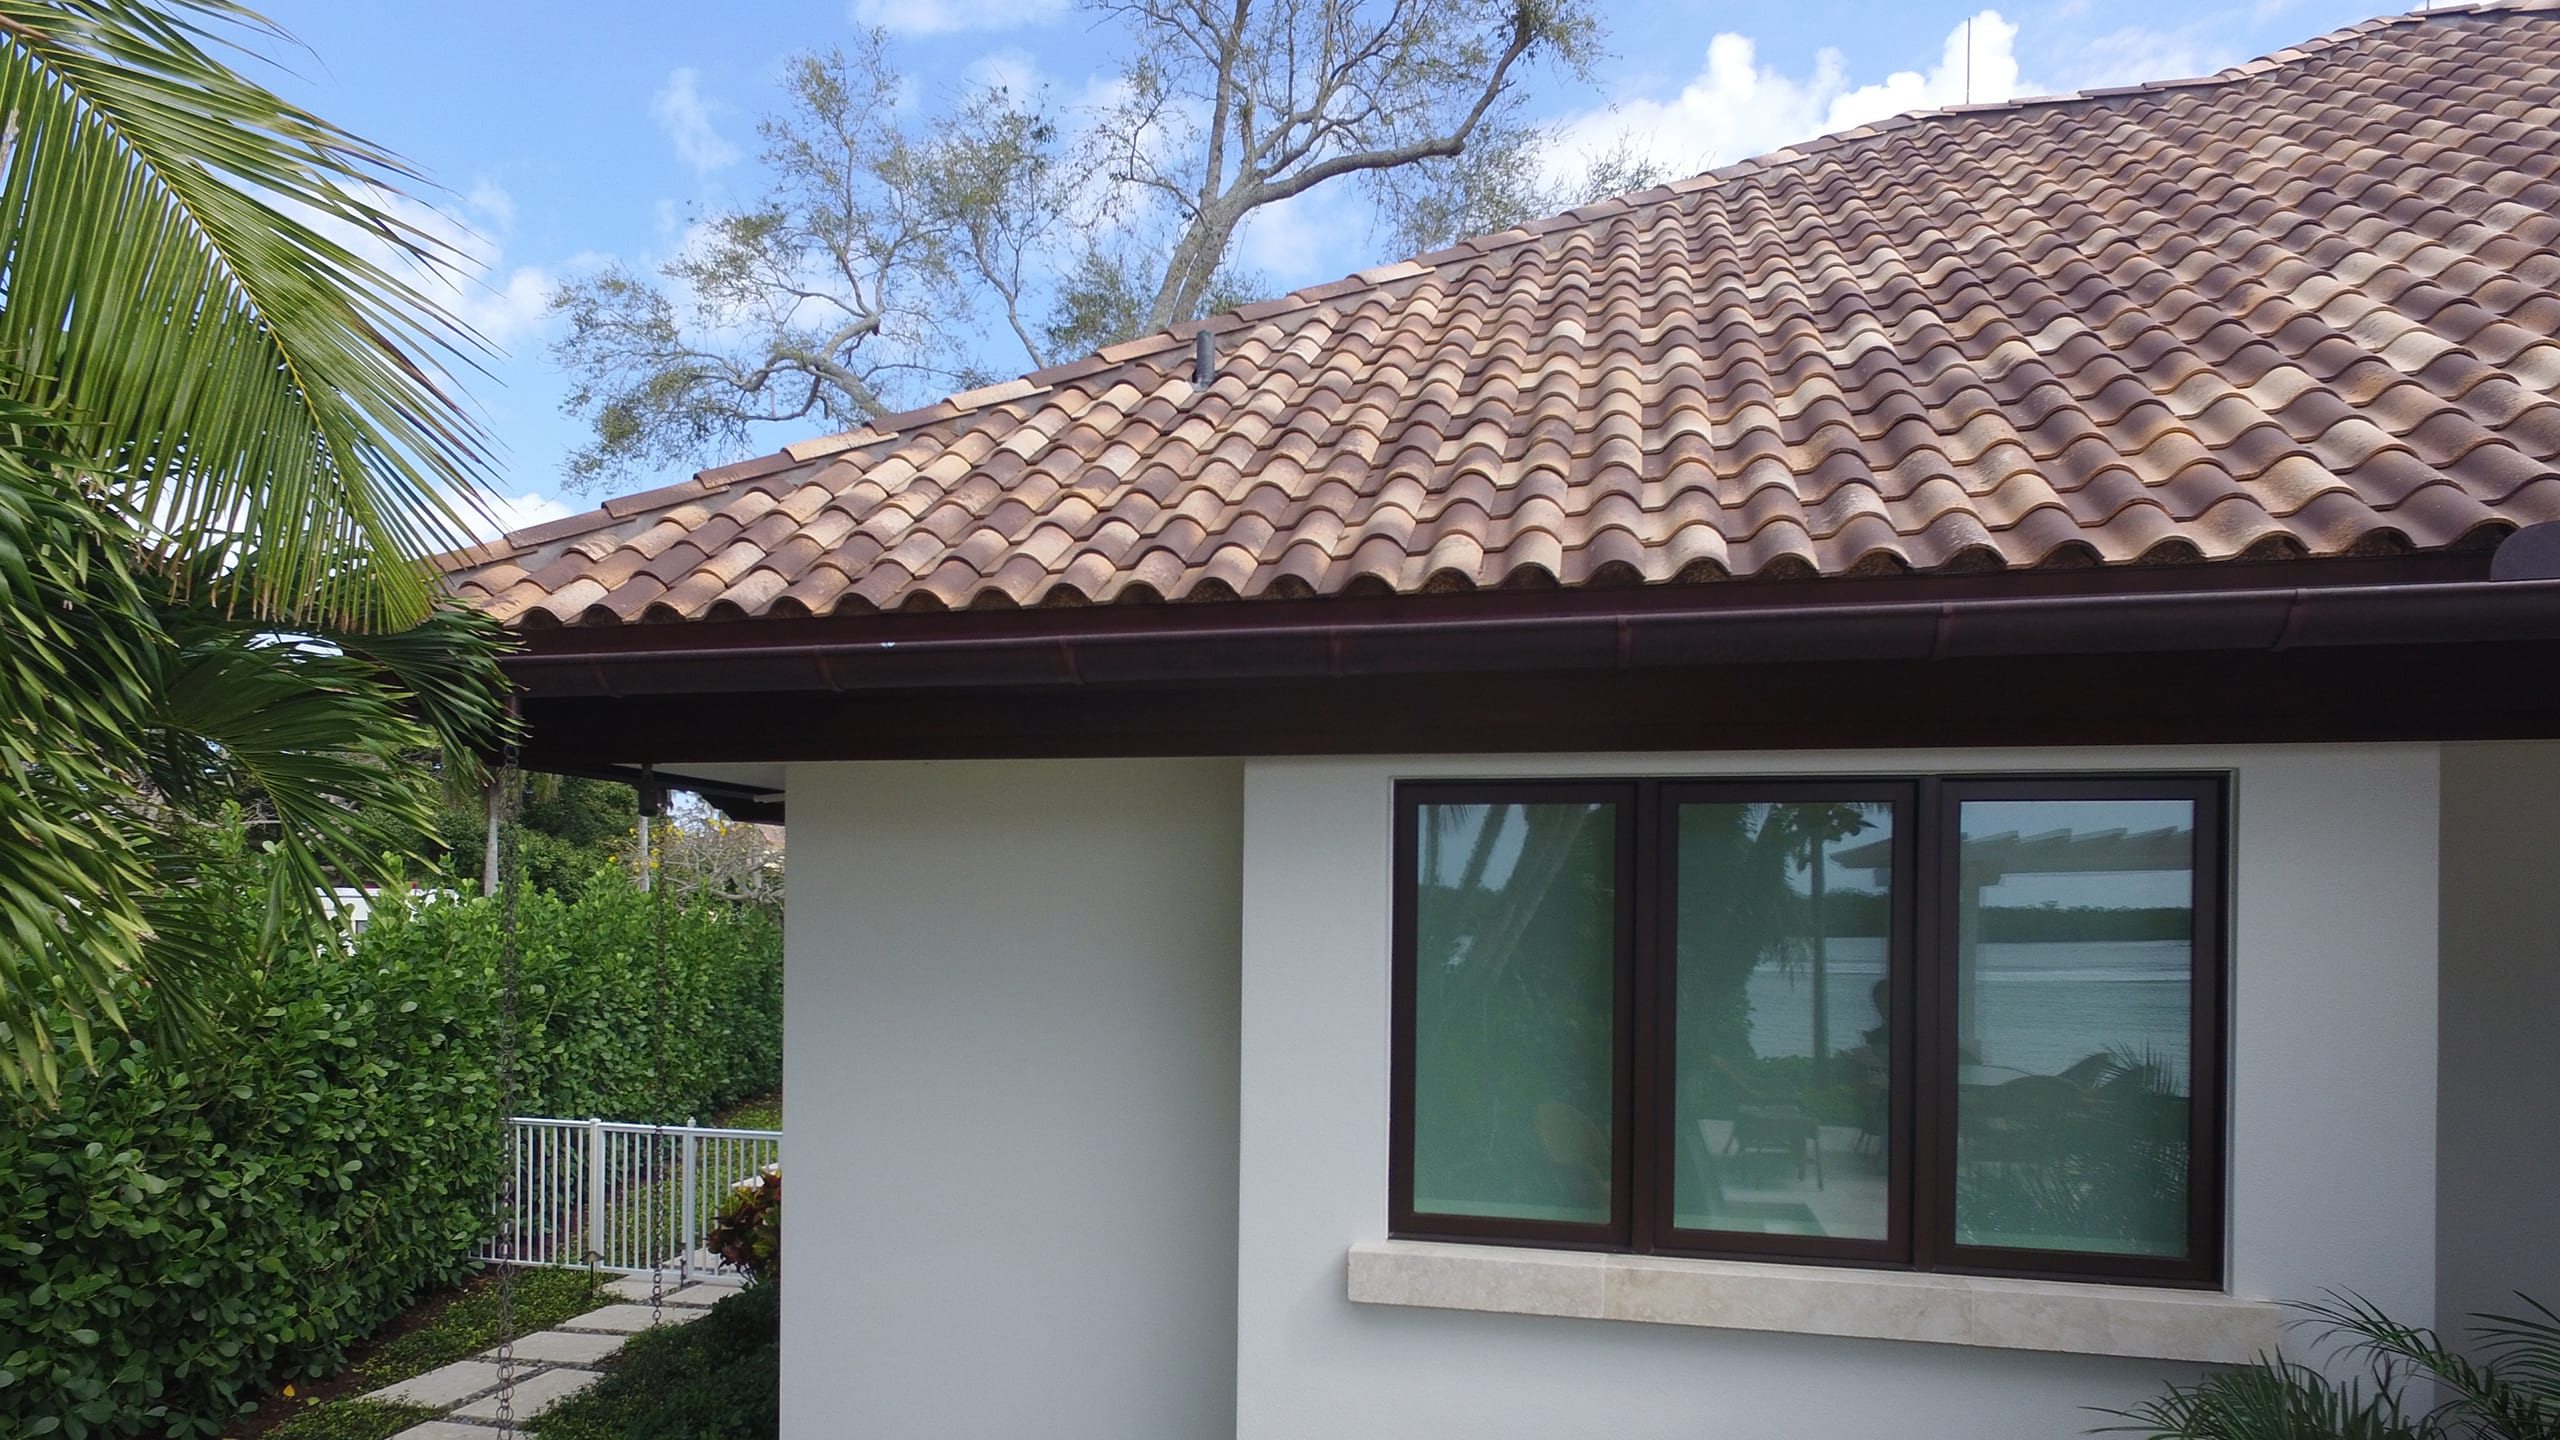 Private Residence in Naples Florida Featuring Ludowici Spanish Clay Roof Tile